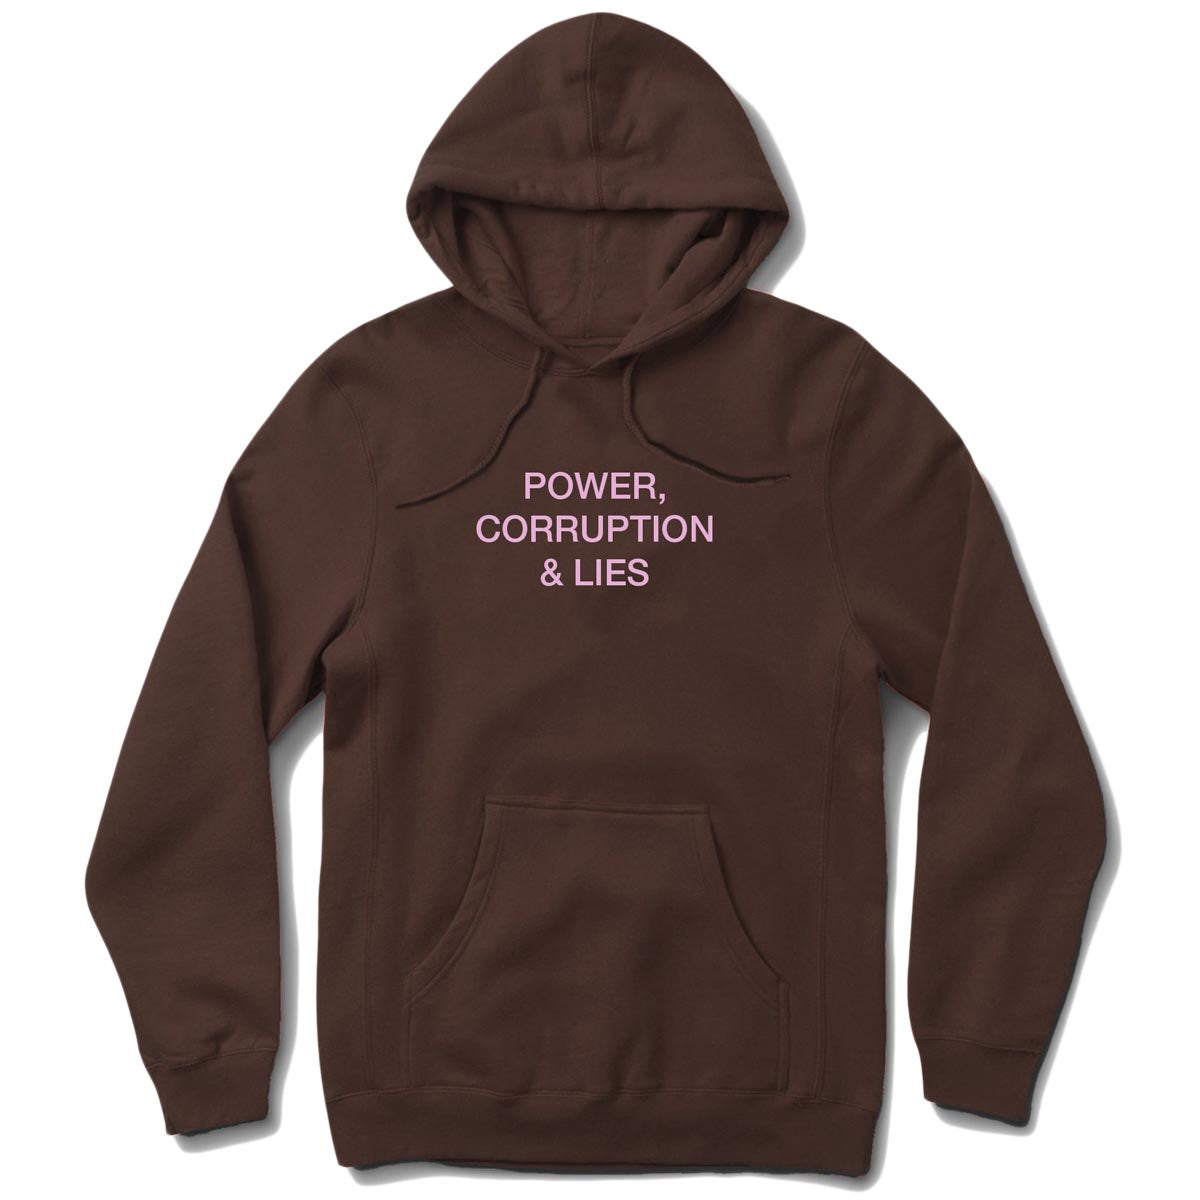 Color Bars x New Order Power Corruption and Lies Hoodie - Brown image 1